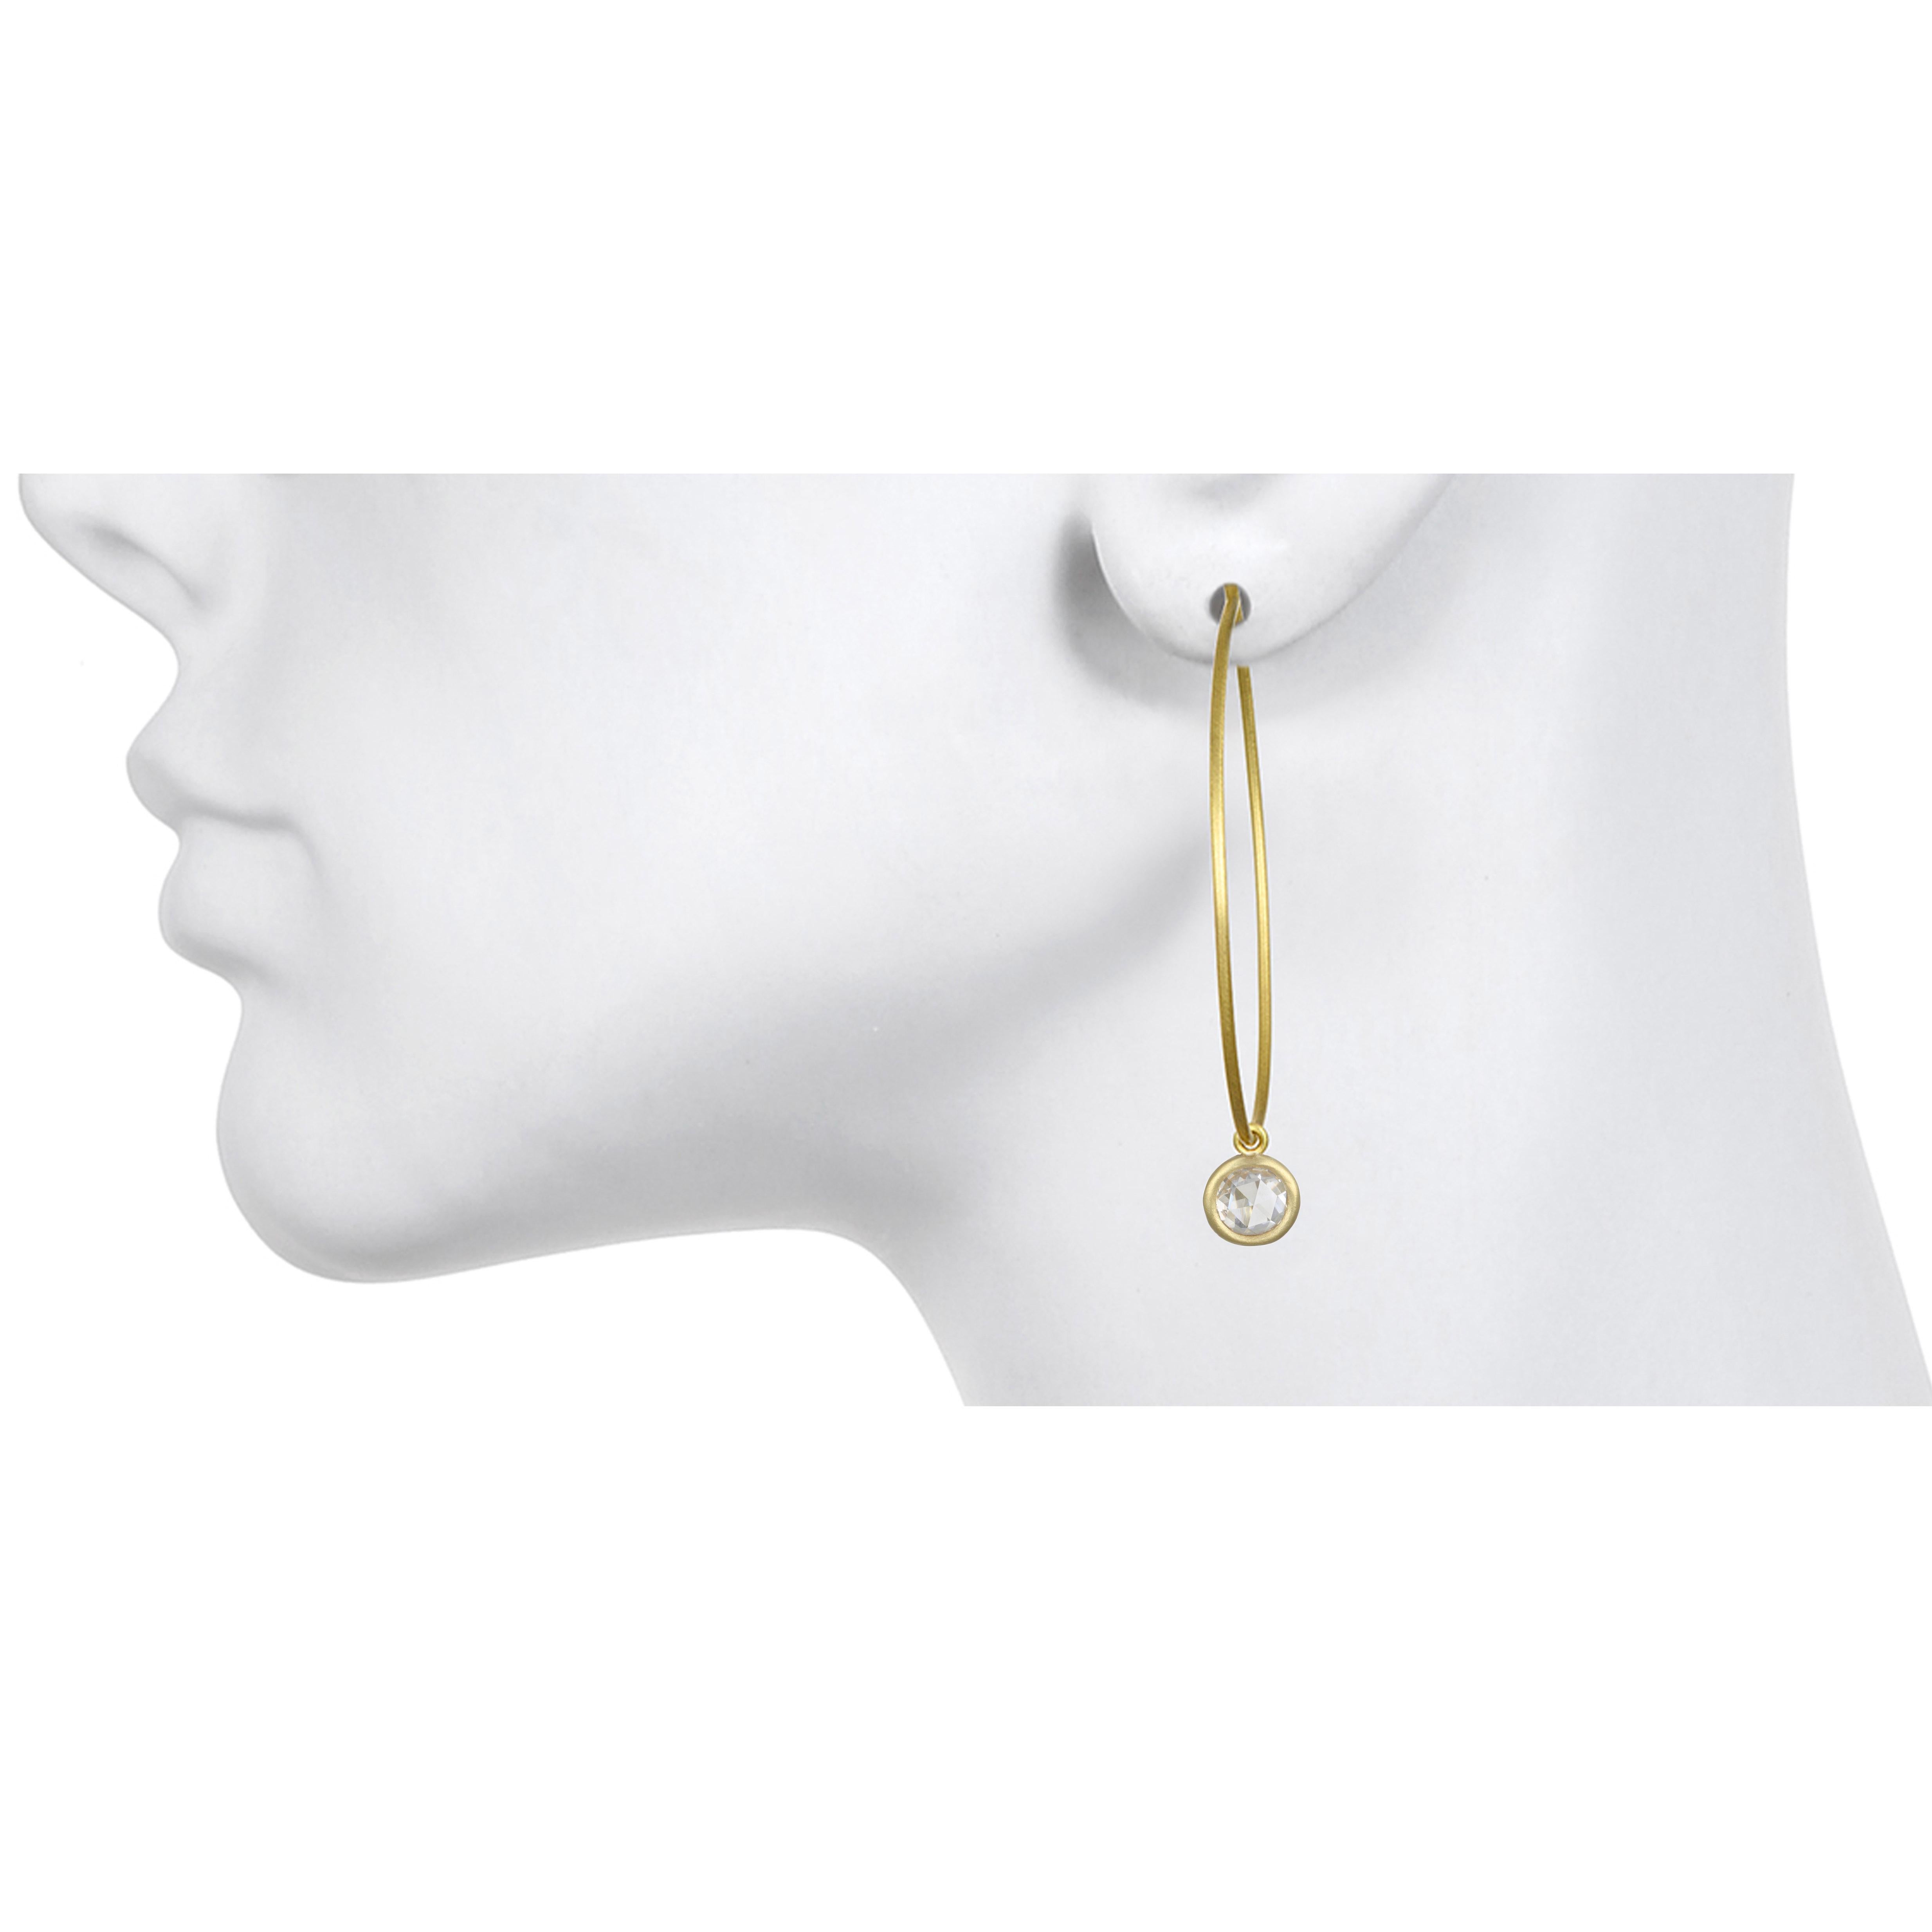 Faye Kim's 18k Green* Gold classic and timeless thin wire hoops are accented with White Sapphire drops. Faceted like diamonds, white sapphires add a bit of sparkle for day or evening. Drops are detachable so hoops can be worn alone. 
Hoops: 1.75